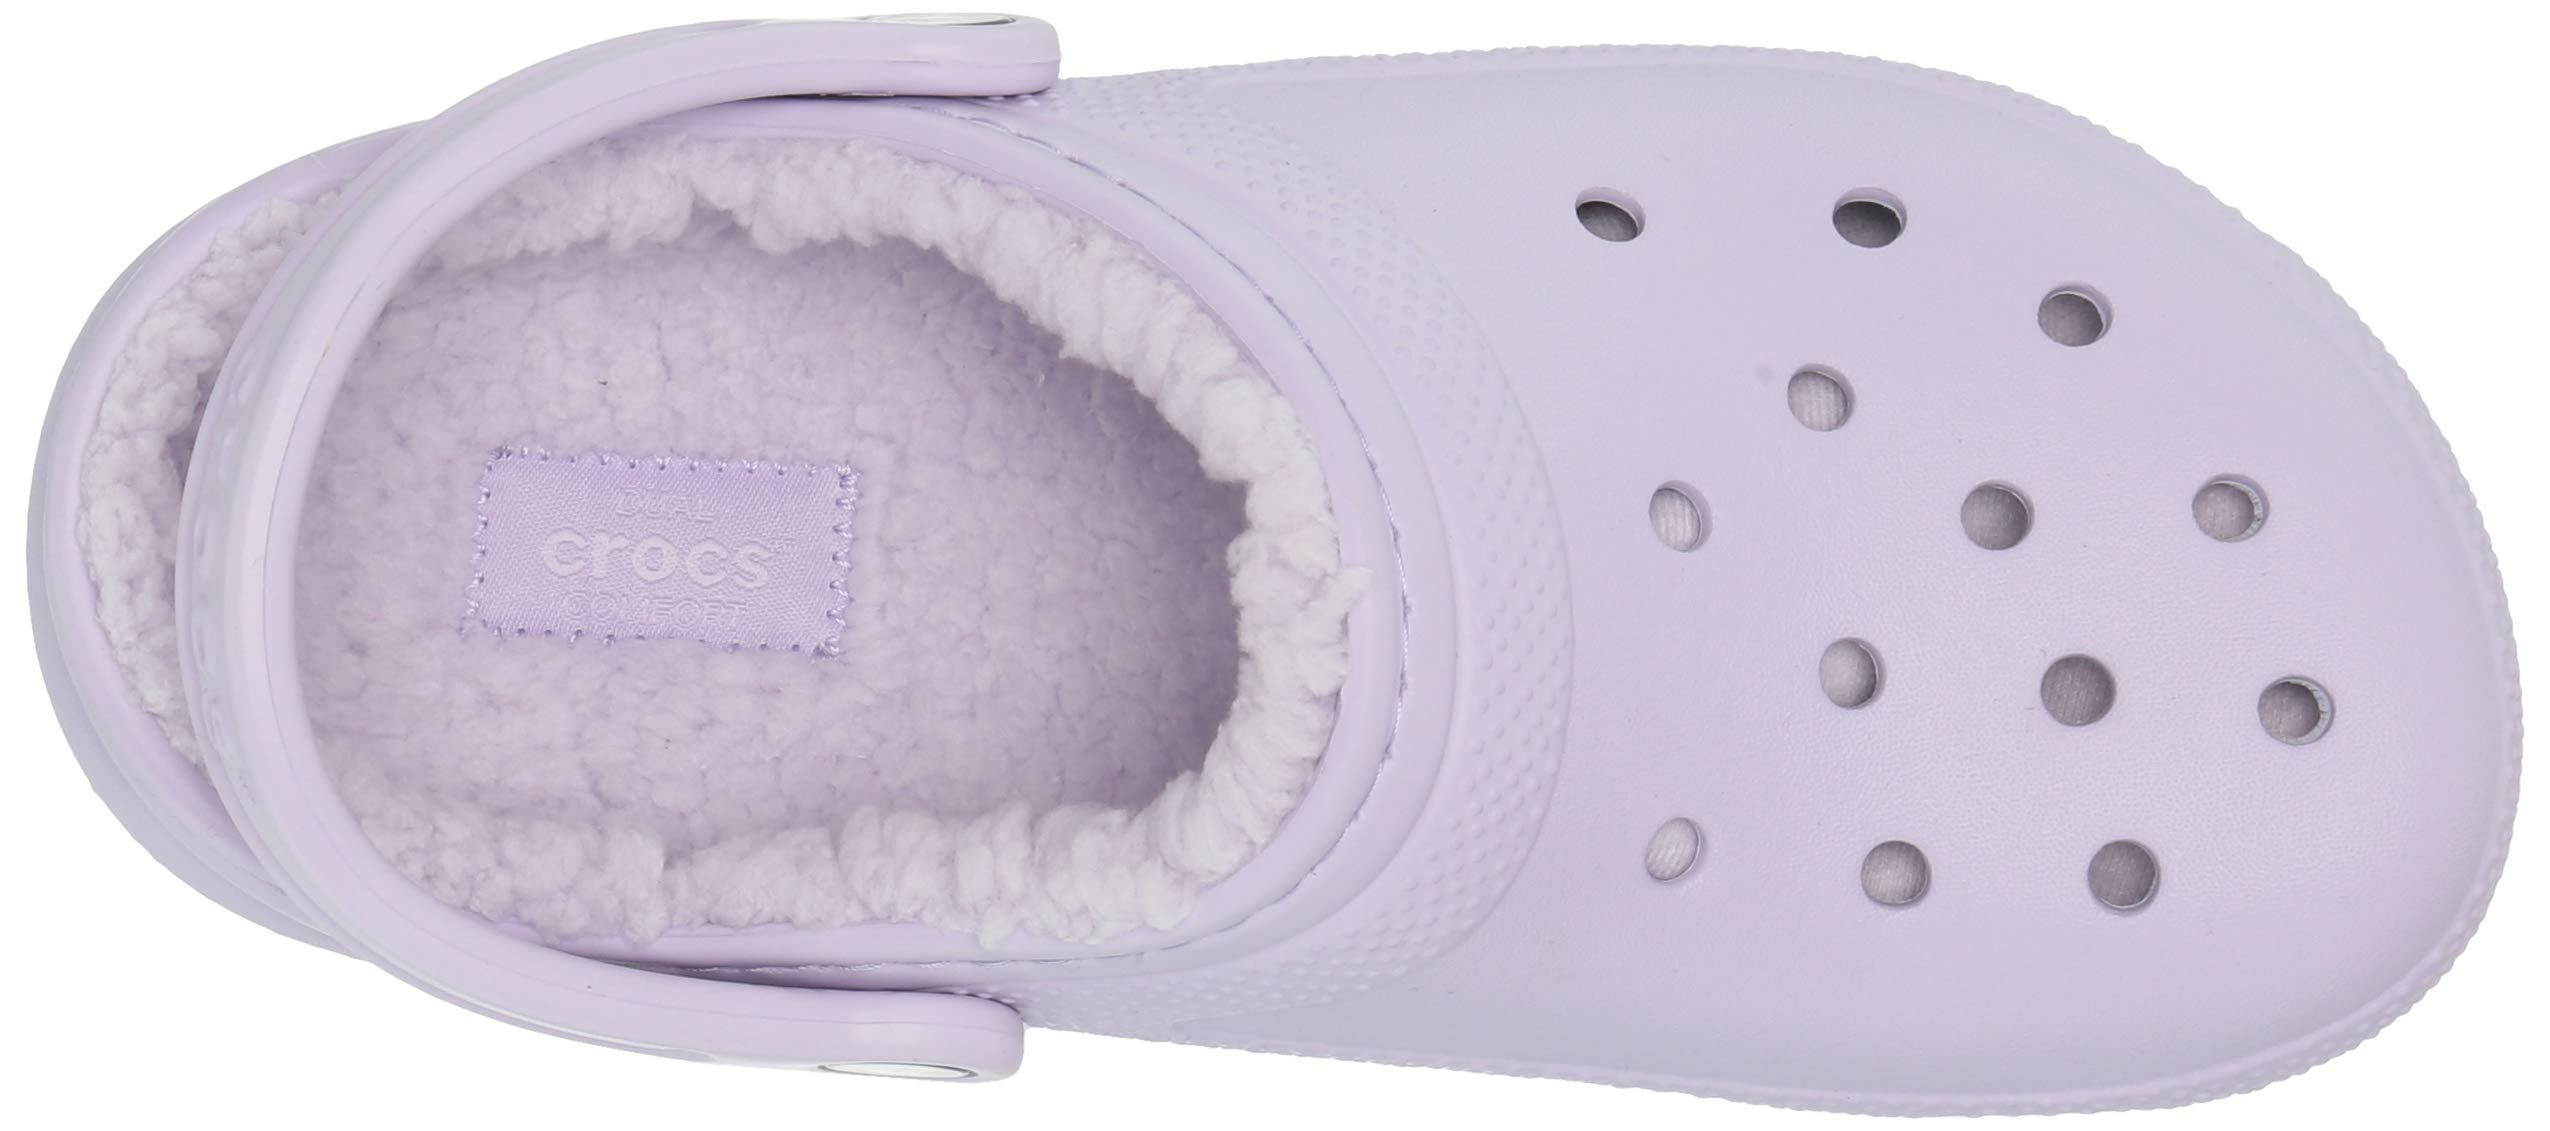 Crocs Unisex-Adult Classic Lined Clog | Fuzzy Slippers